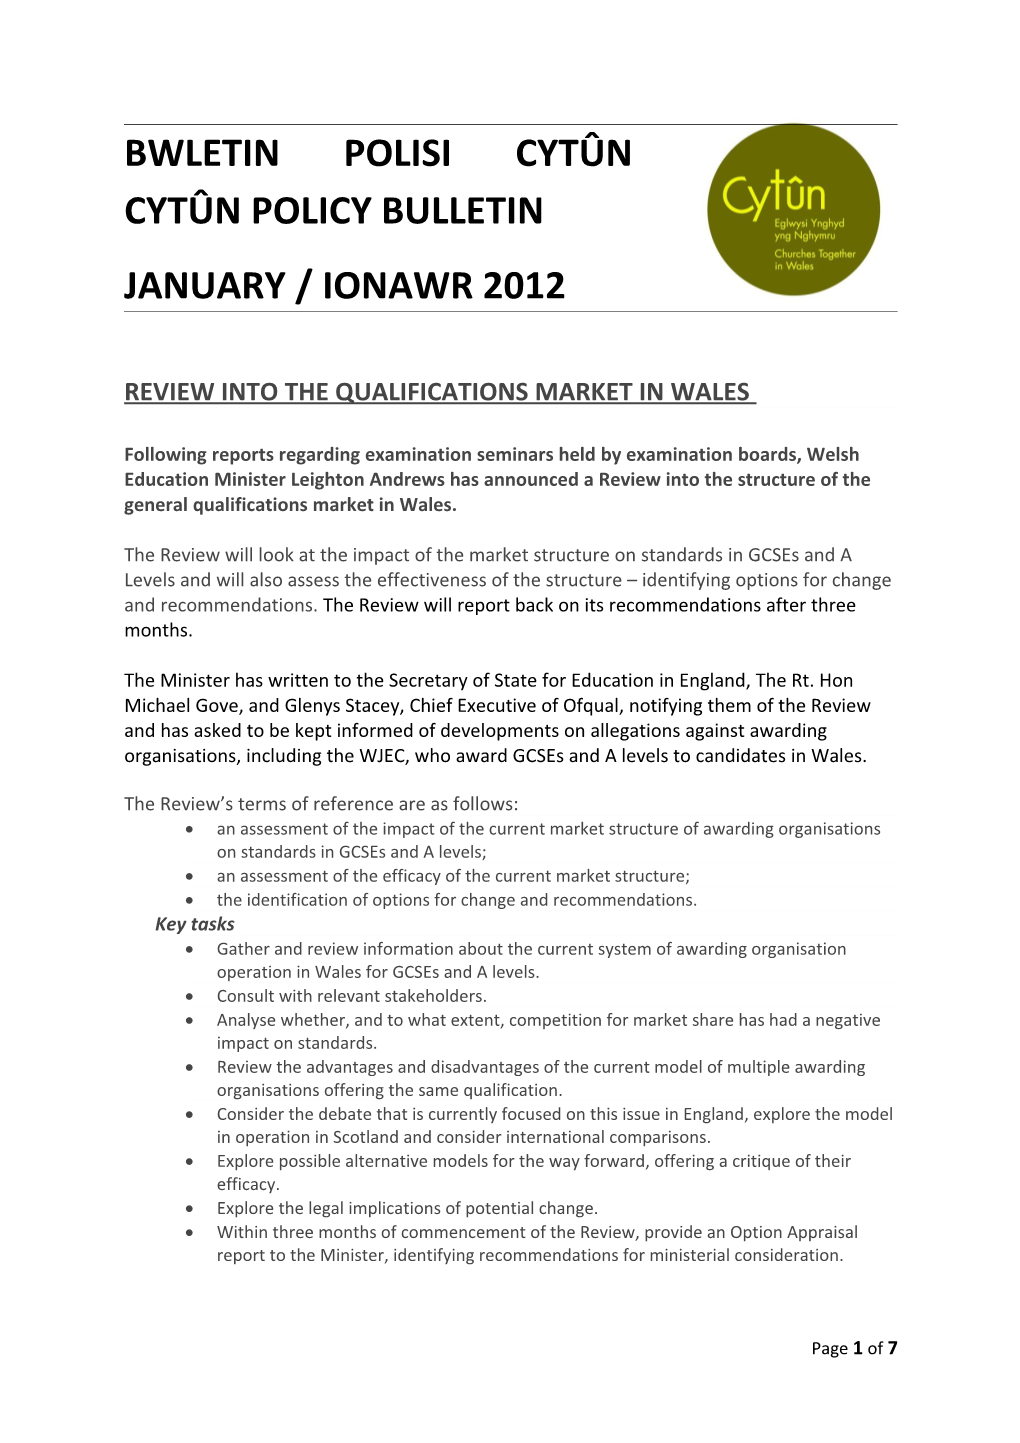 Review Into the Qualifications Market in Wales